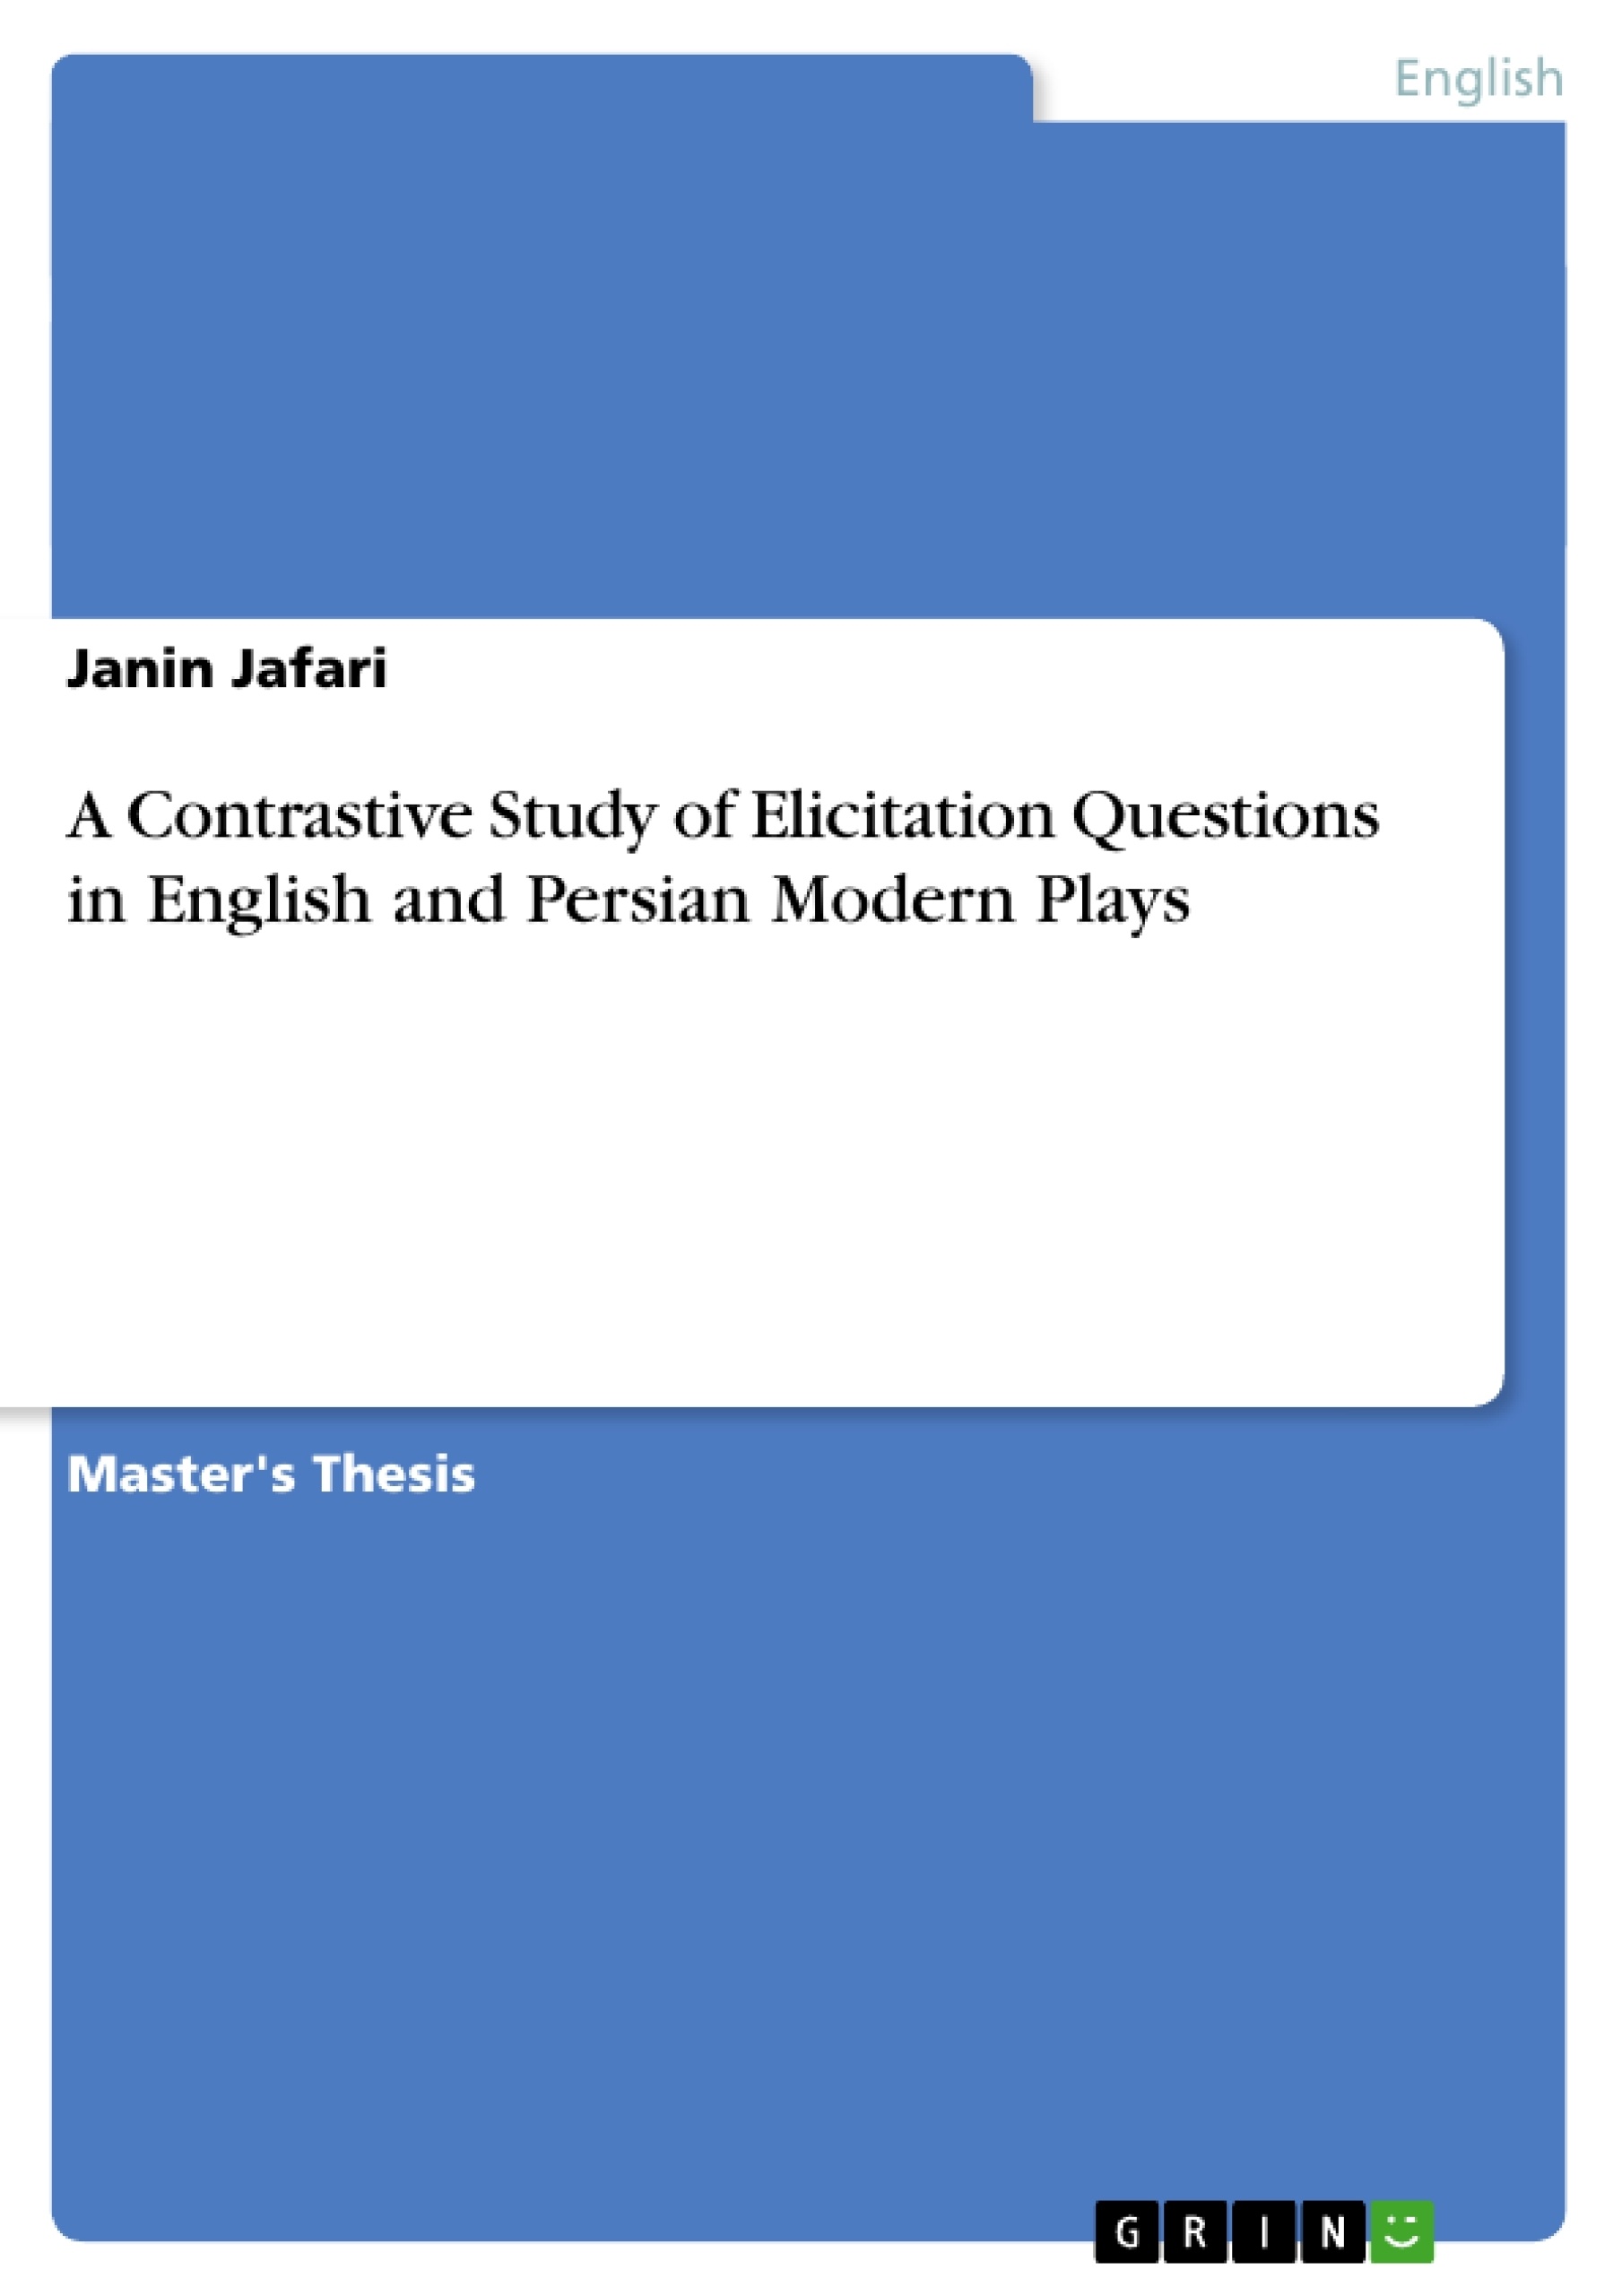 Título: A Contrastive Study of Elicitation Questions in English and Persian Modern Plays